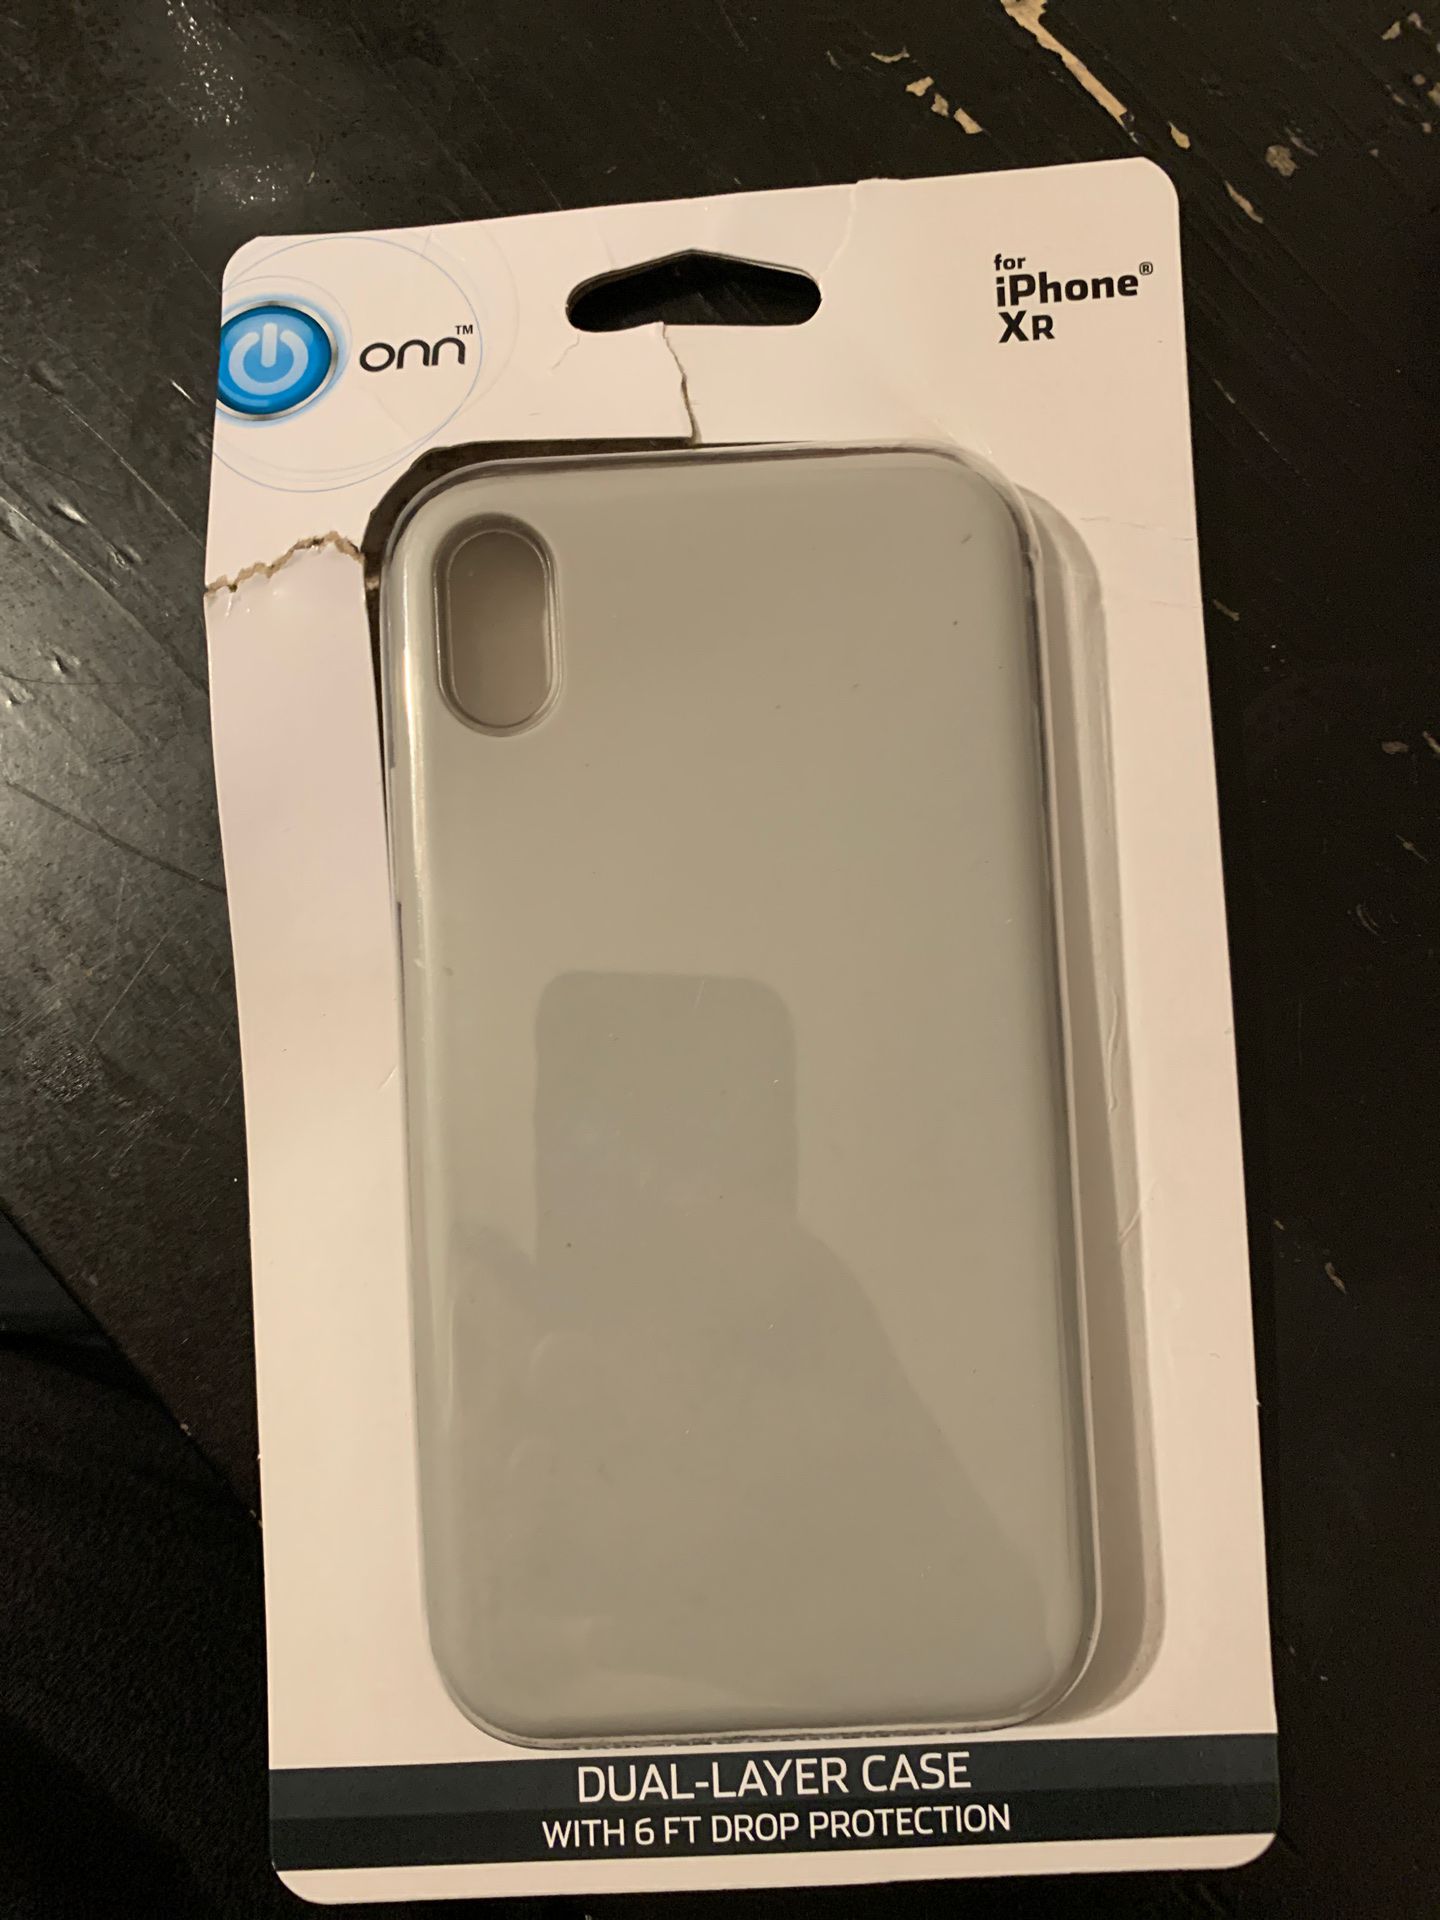 iPhone XR dual layer case